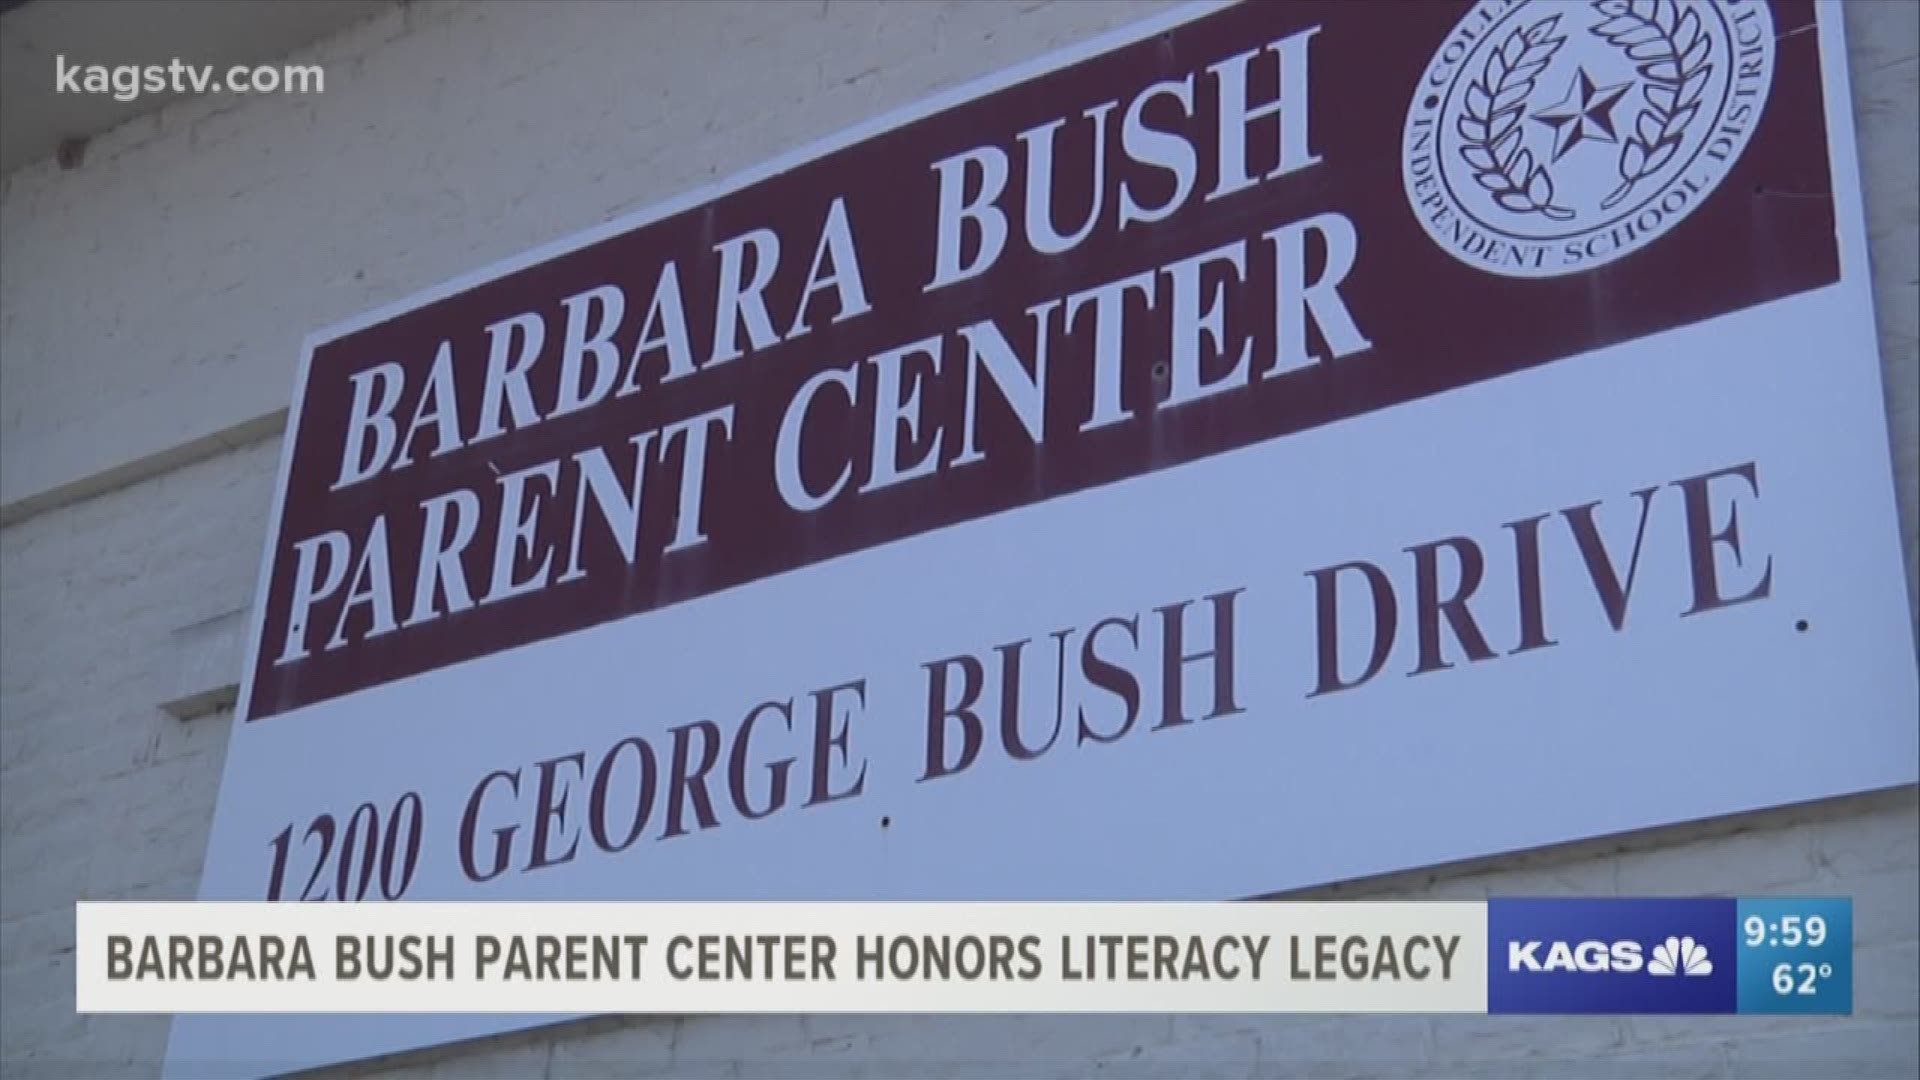 Barbara Bush was known for her extensive work in family literacy. Here in our own community the Barbara Bush Parent Center is working to honor that legacy through their work with local area families.